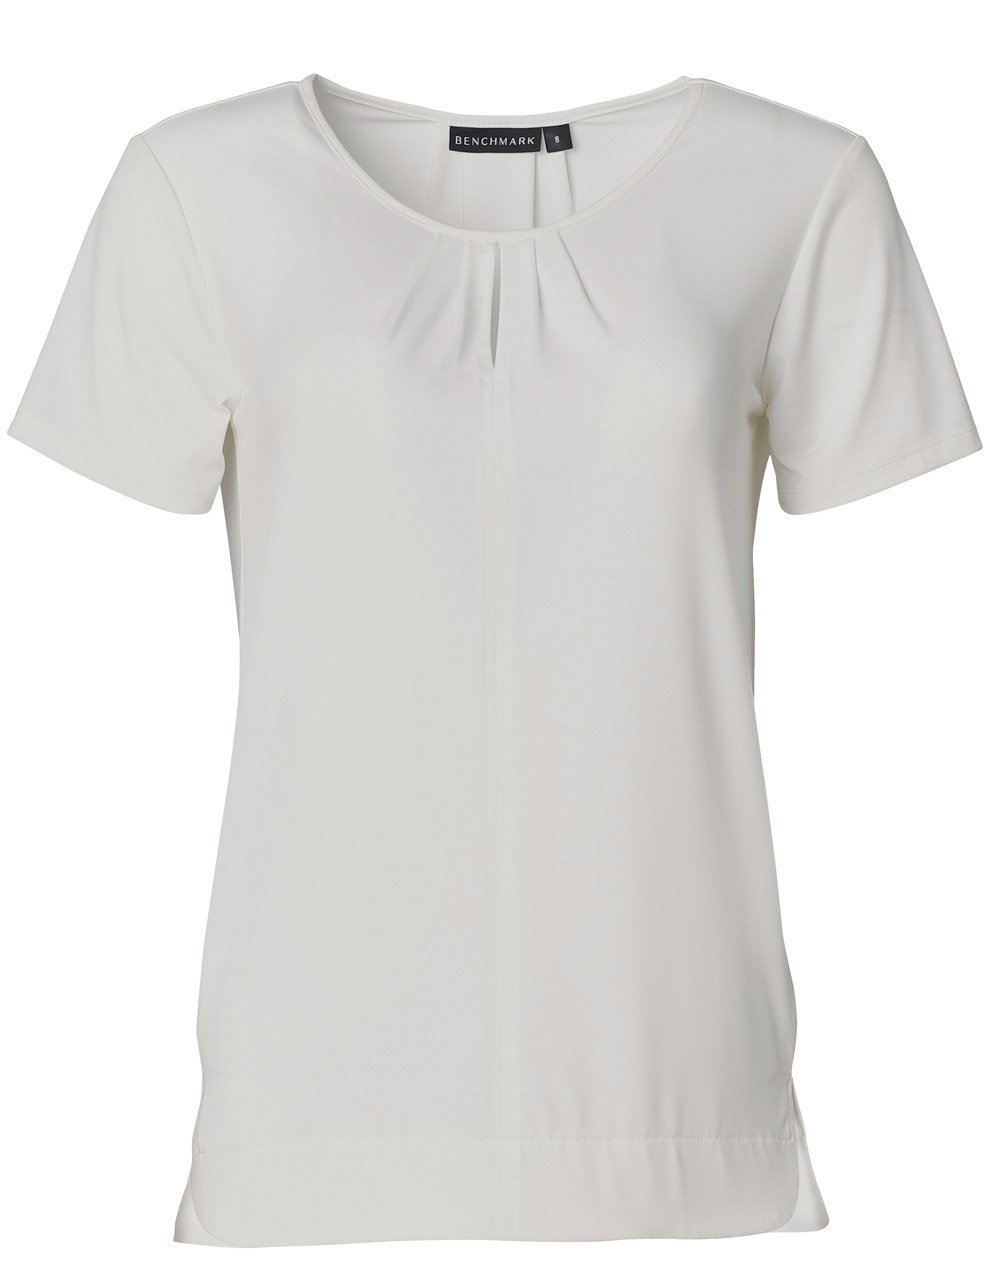 Benchmark M8850 Ladies Round Neck With Pleats S/s Knit Top